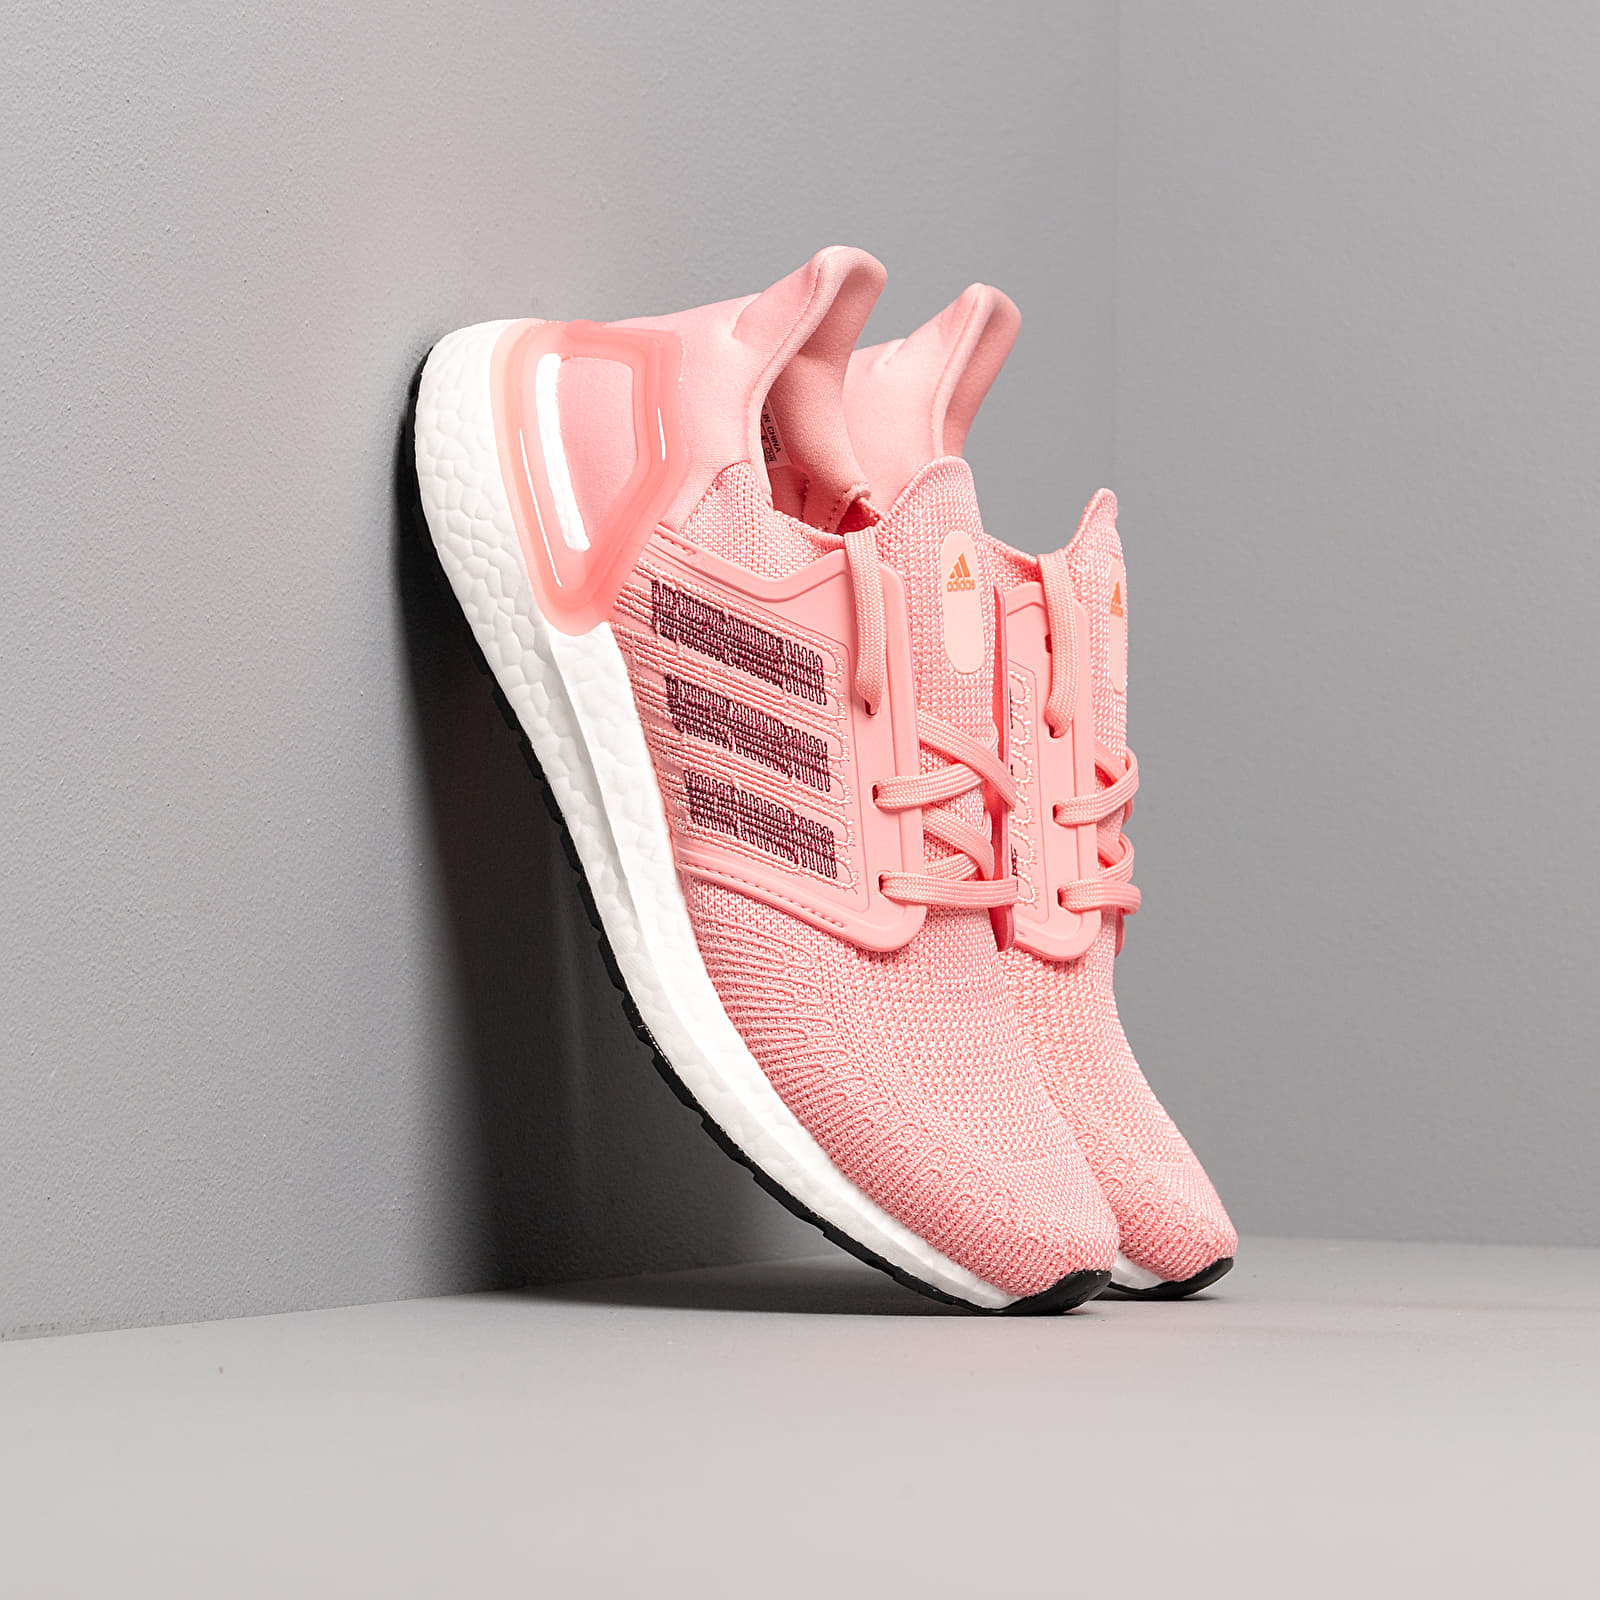 Women's shoes adidas UltraBOOST 20 W Glow Pink/ Maroon/ Signature Coral